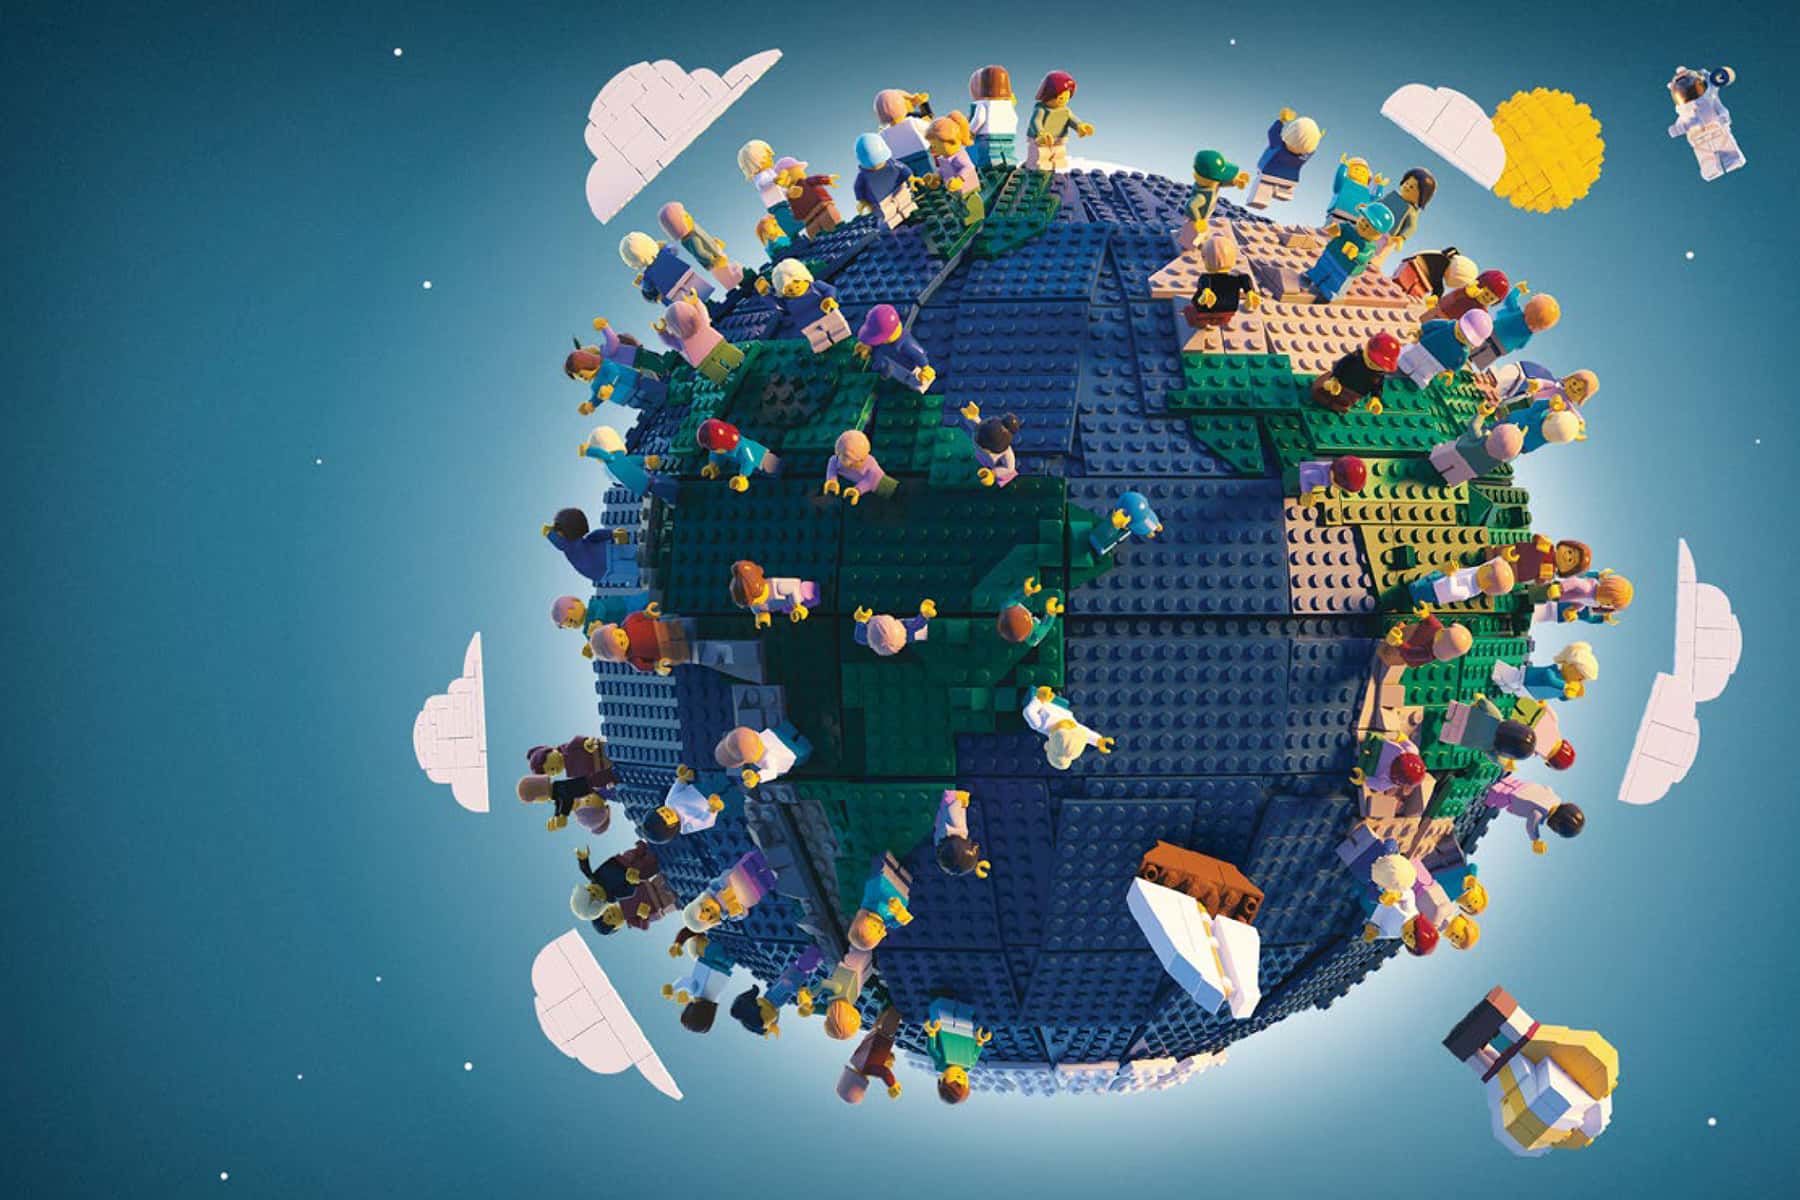 Build the Change: The LEGO Group's Network Impact